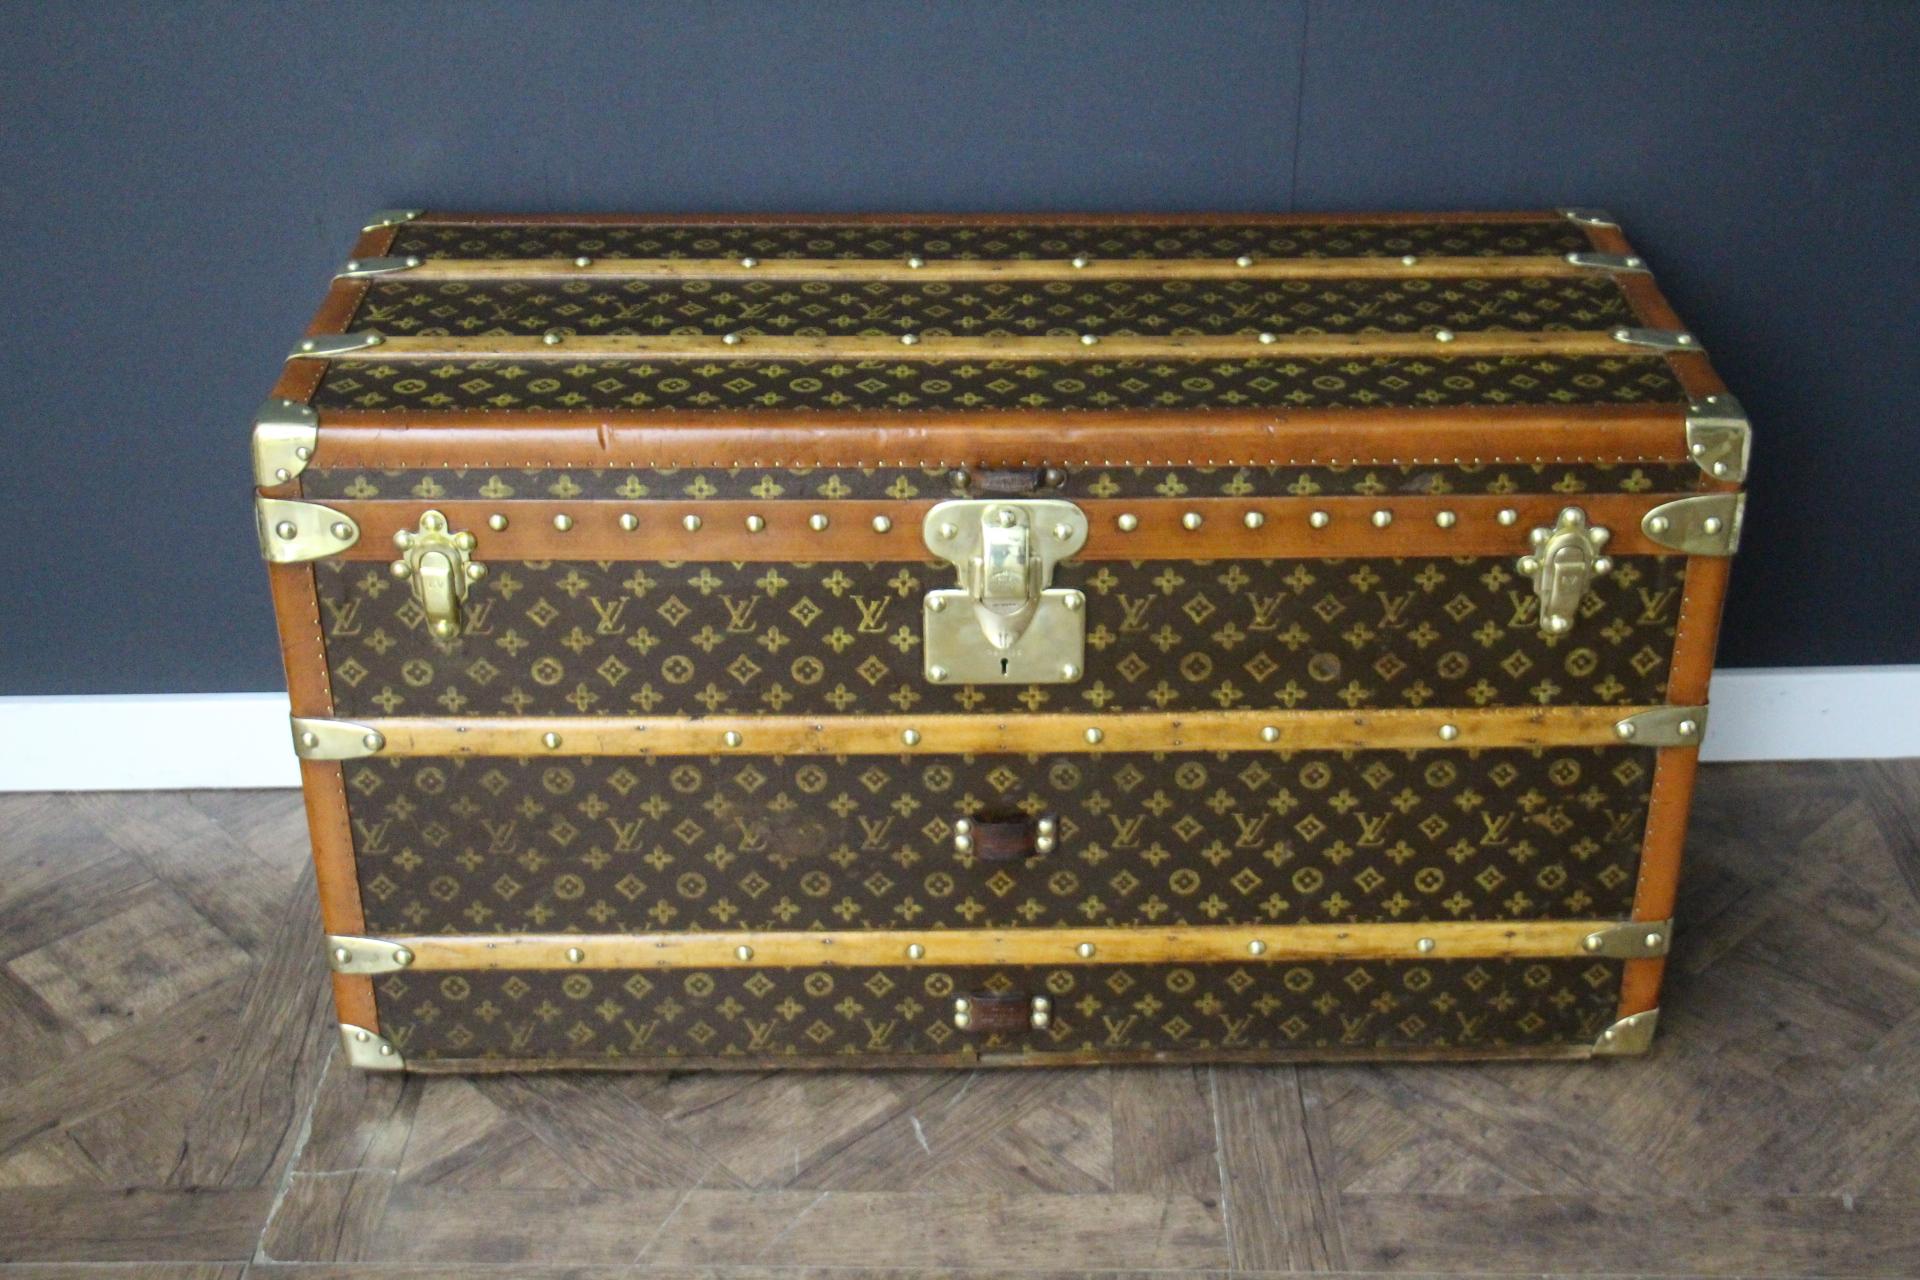 This magnificent Louis Vuitton shoe trunk features stenciled canvas monogram, Louis Vuitton stamped solid brass locks, studs and large leather side handles. It also has got honey color lozine trim. Its main lock has got an engraved lock number.
This